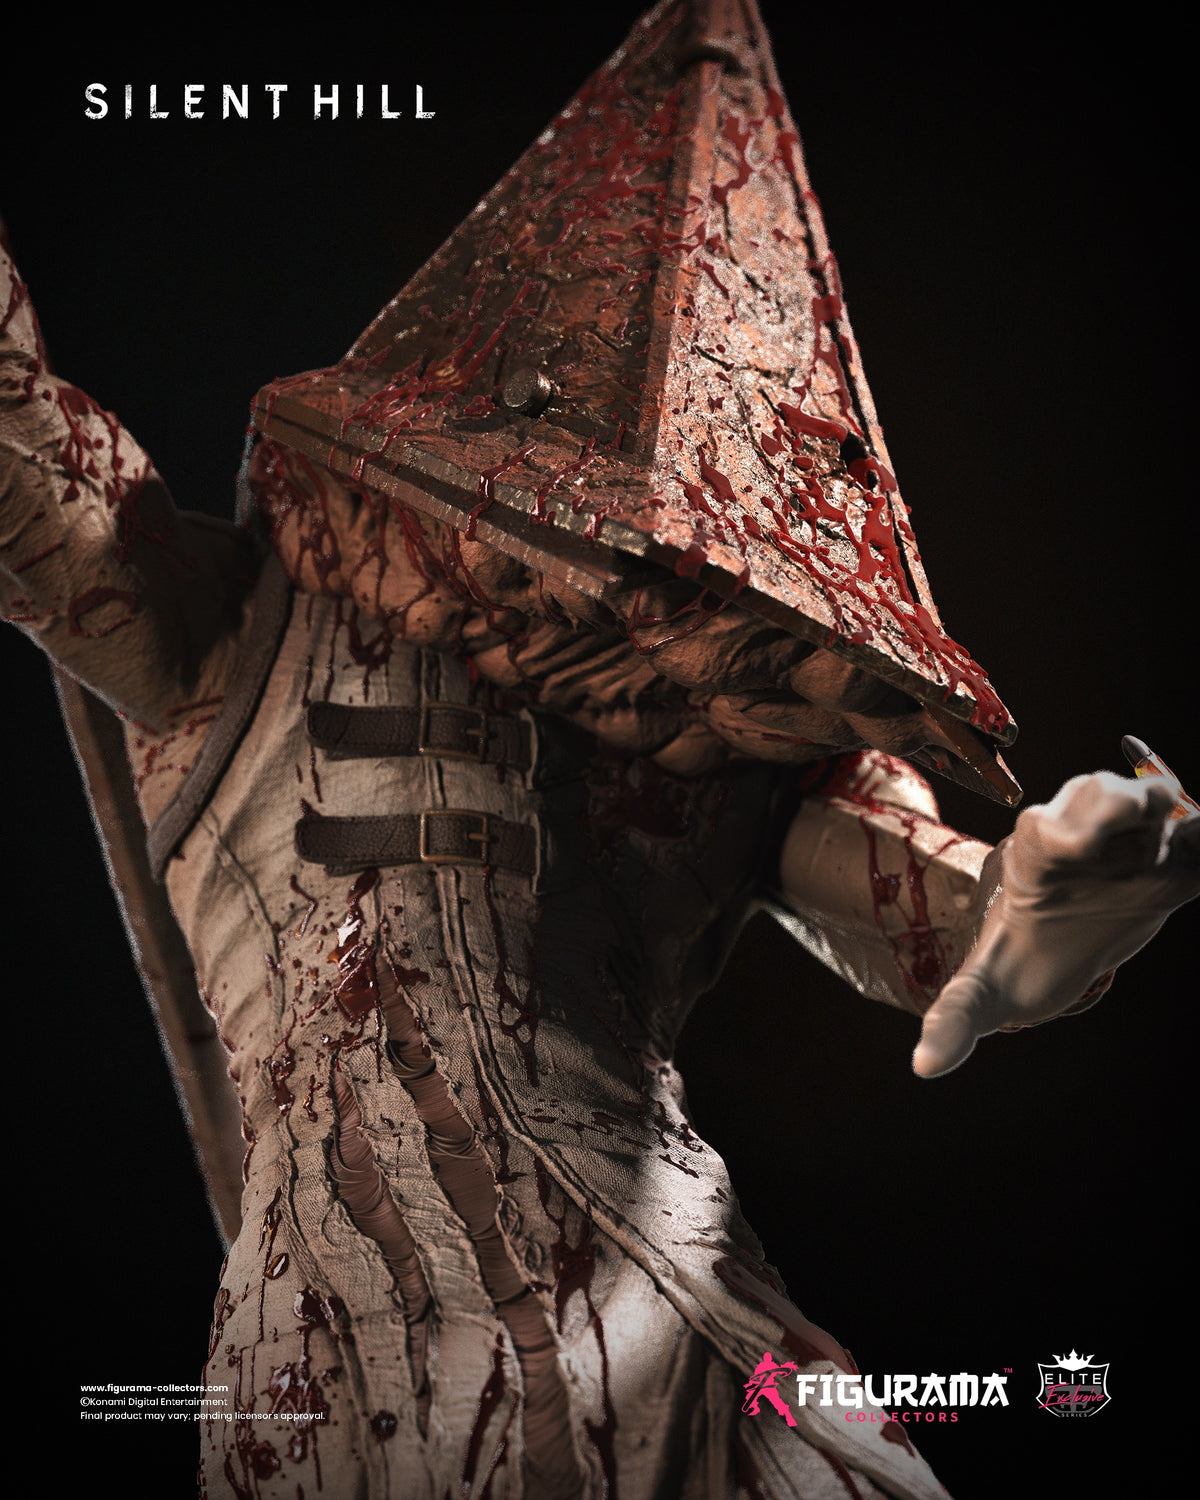 Pyramid Head (Red Pyramid Thing) (2) Photographic Print for Sale by  Design-By-Dan